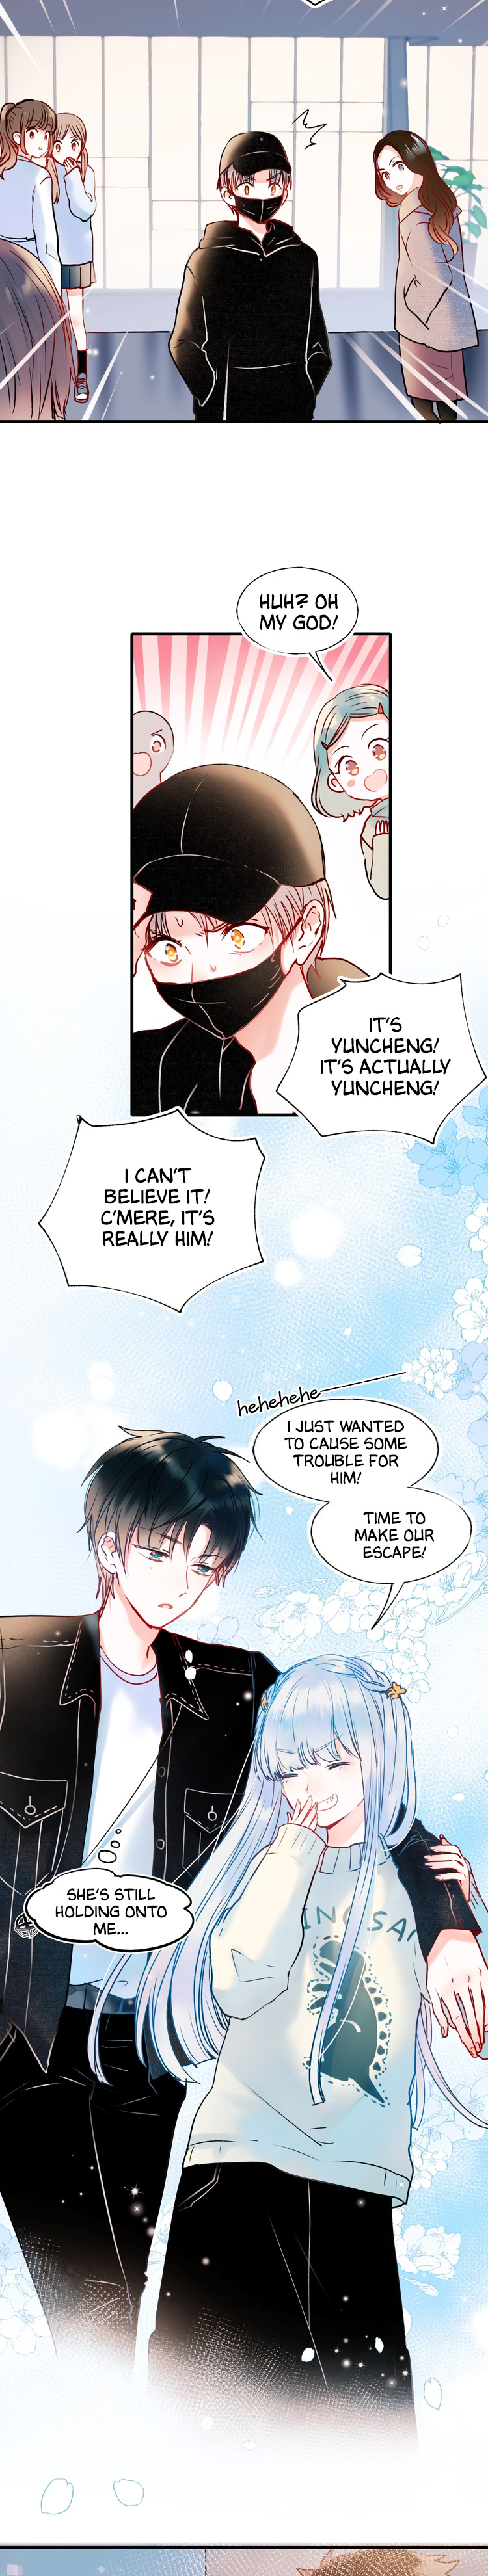 To Be Winner Ch. 46 offline discussion